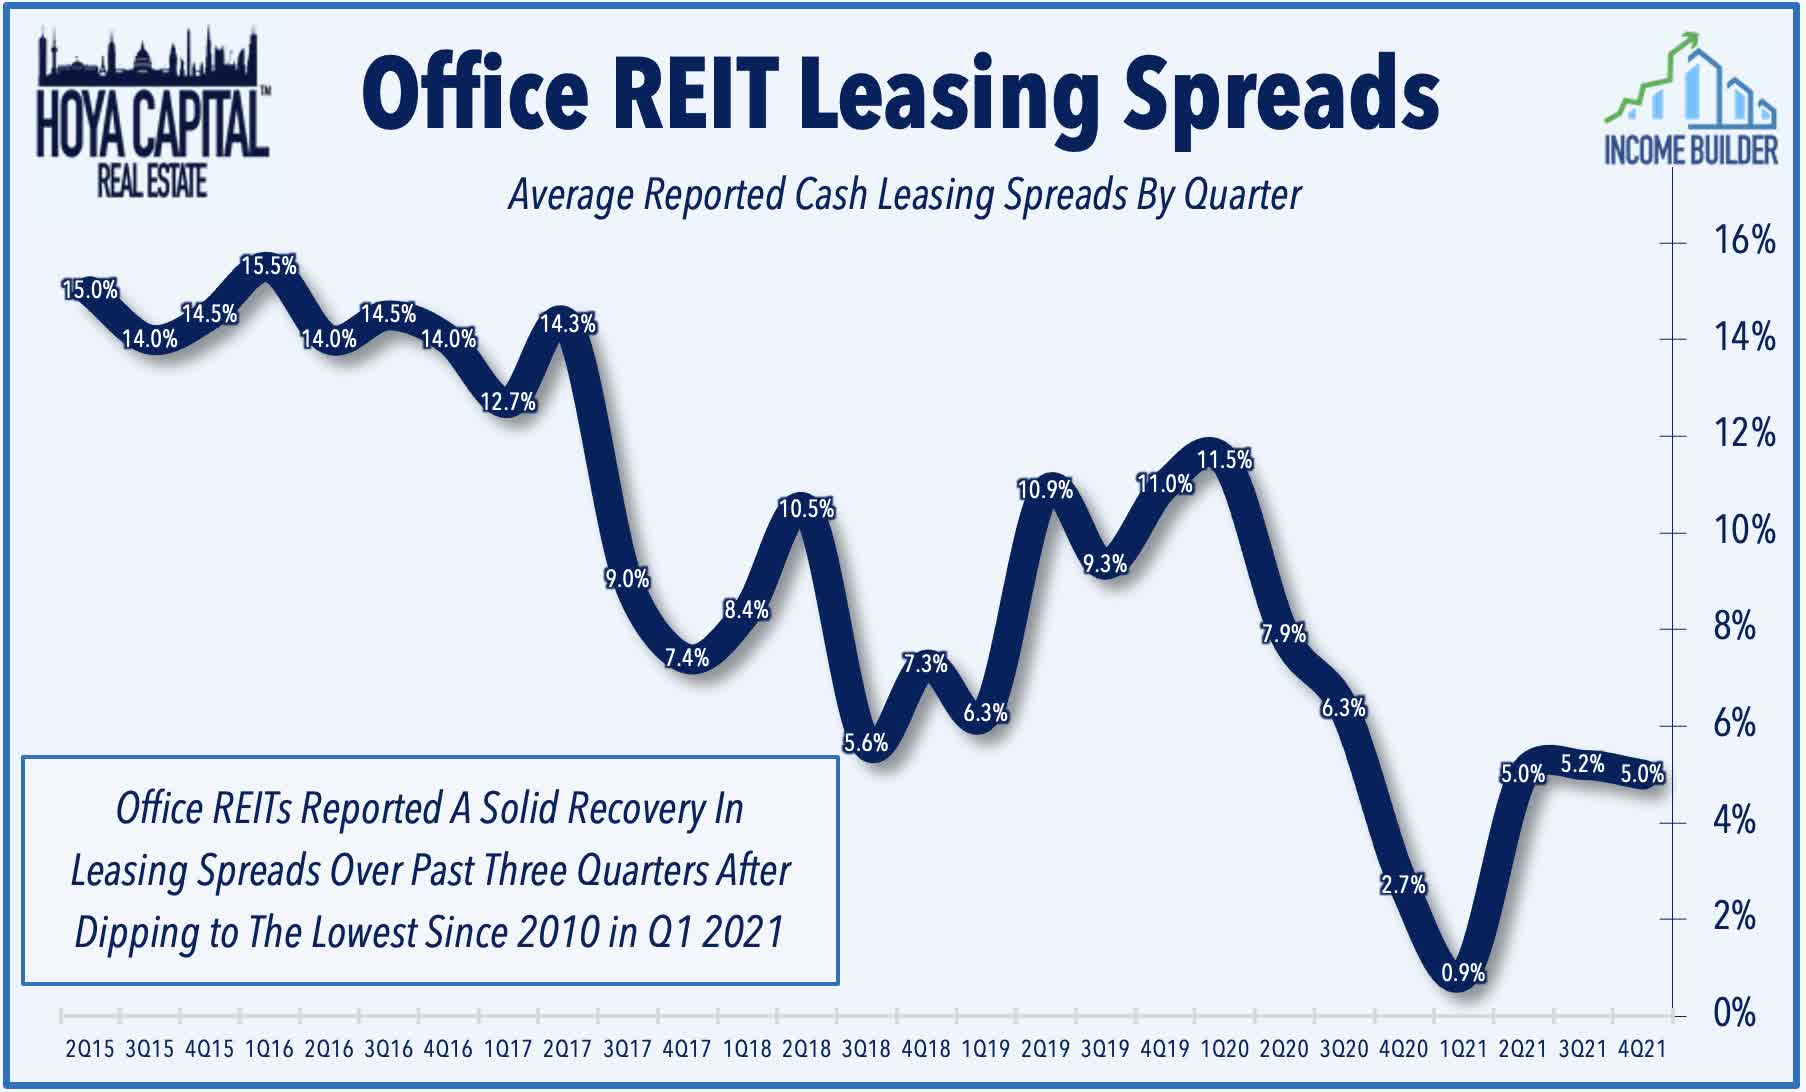 Line chart showing Office leasing spreads dropping from around 15% in 2015 to almost 0 a year ago, to about 5% in Q2, Q3, and Q4 of 2021